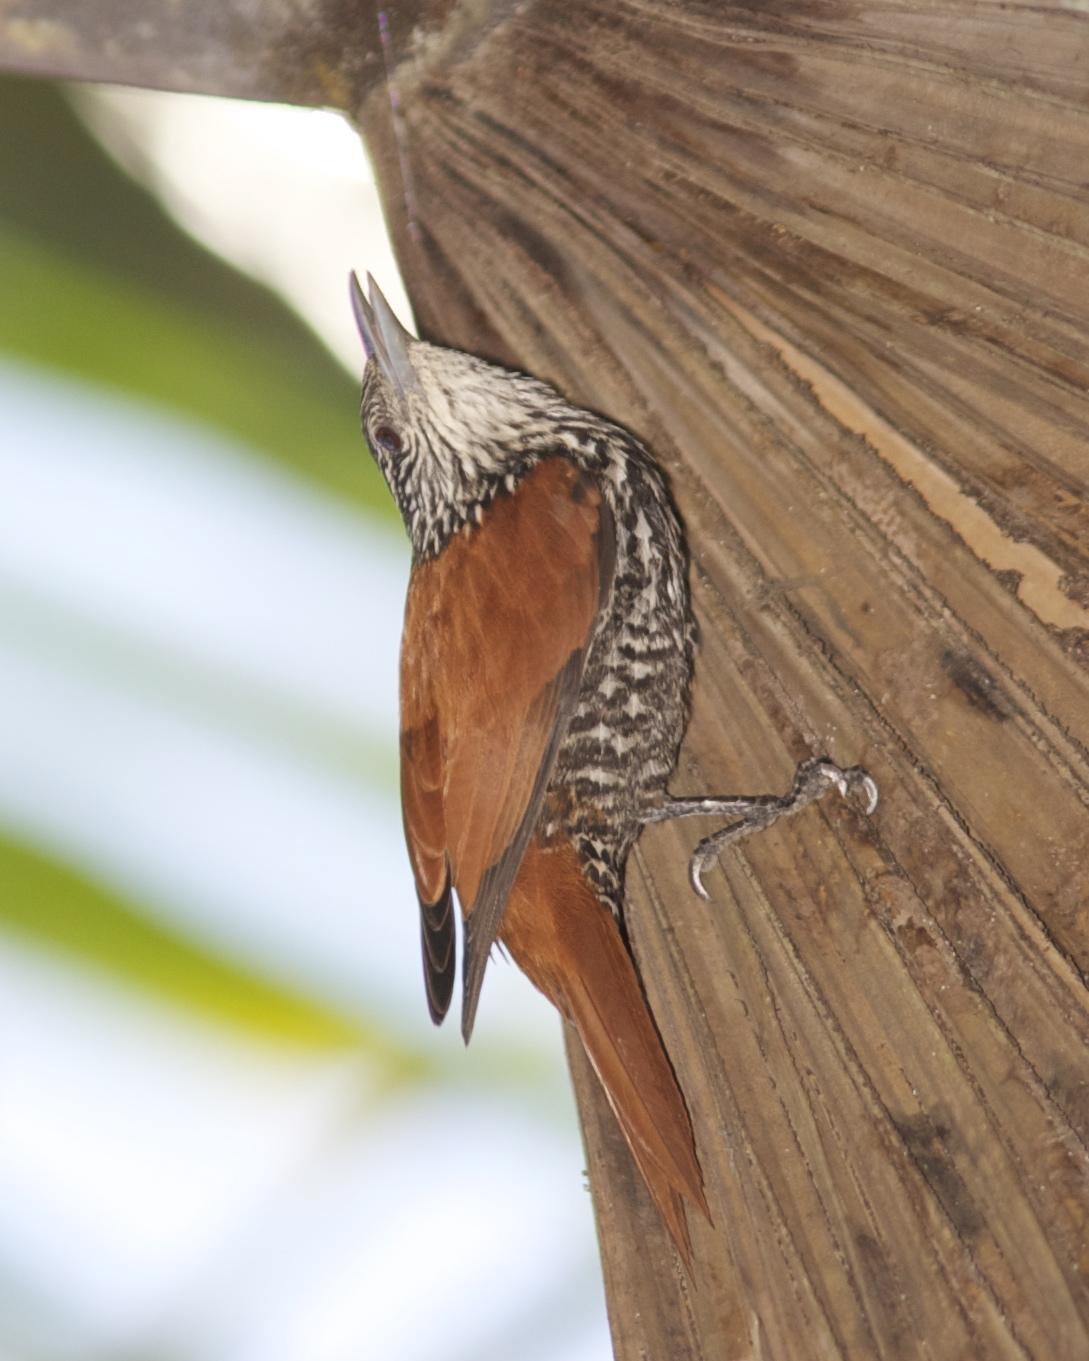 Point-tailed Palmcreeper Photo by Marcelo Padua